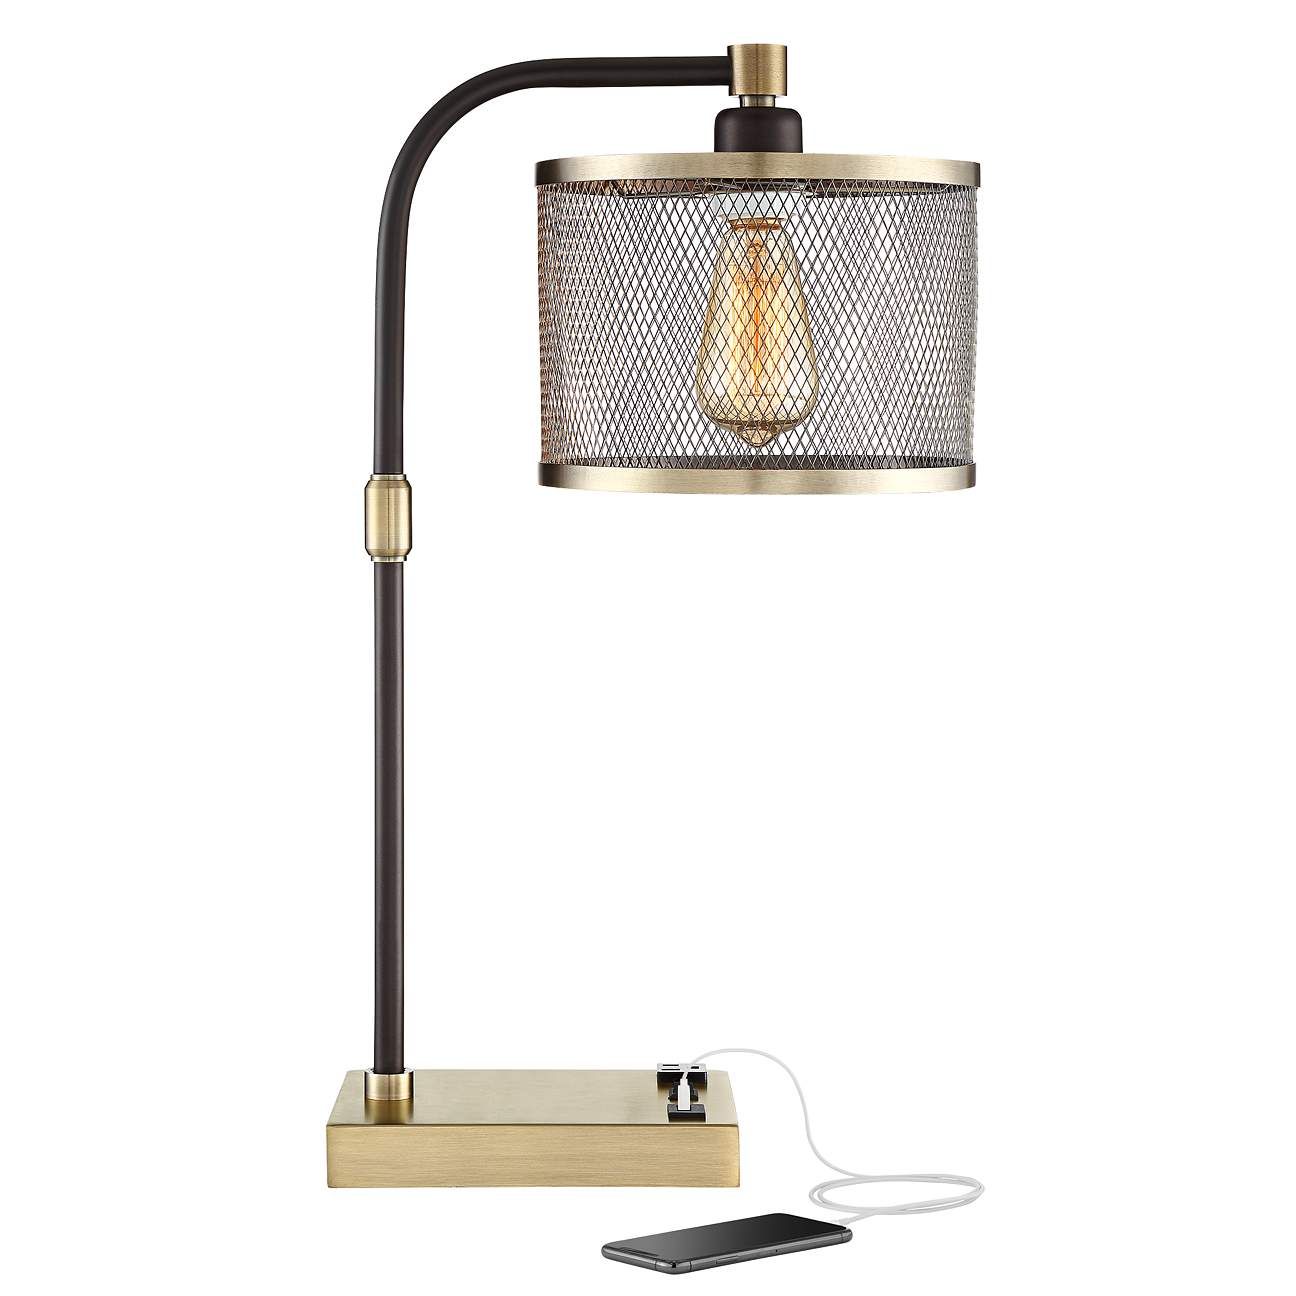 Brody Antique Brass Desk Lamp with USB and Outlet | LampsPlus.com